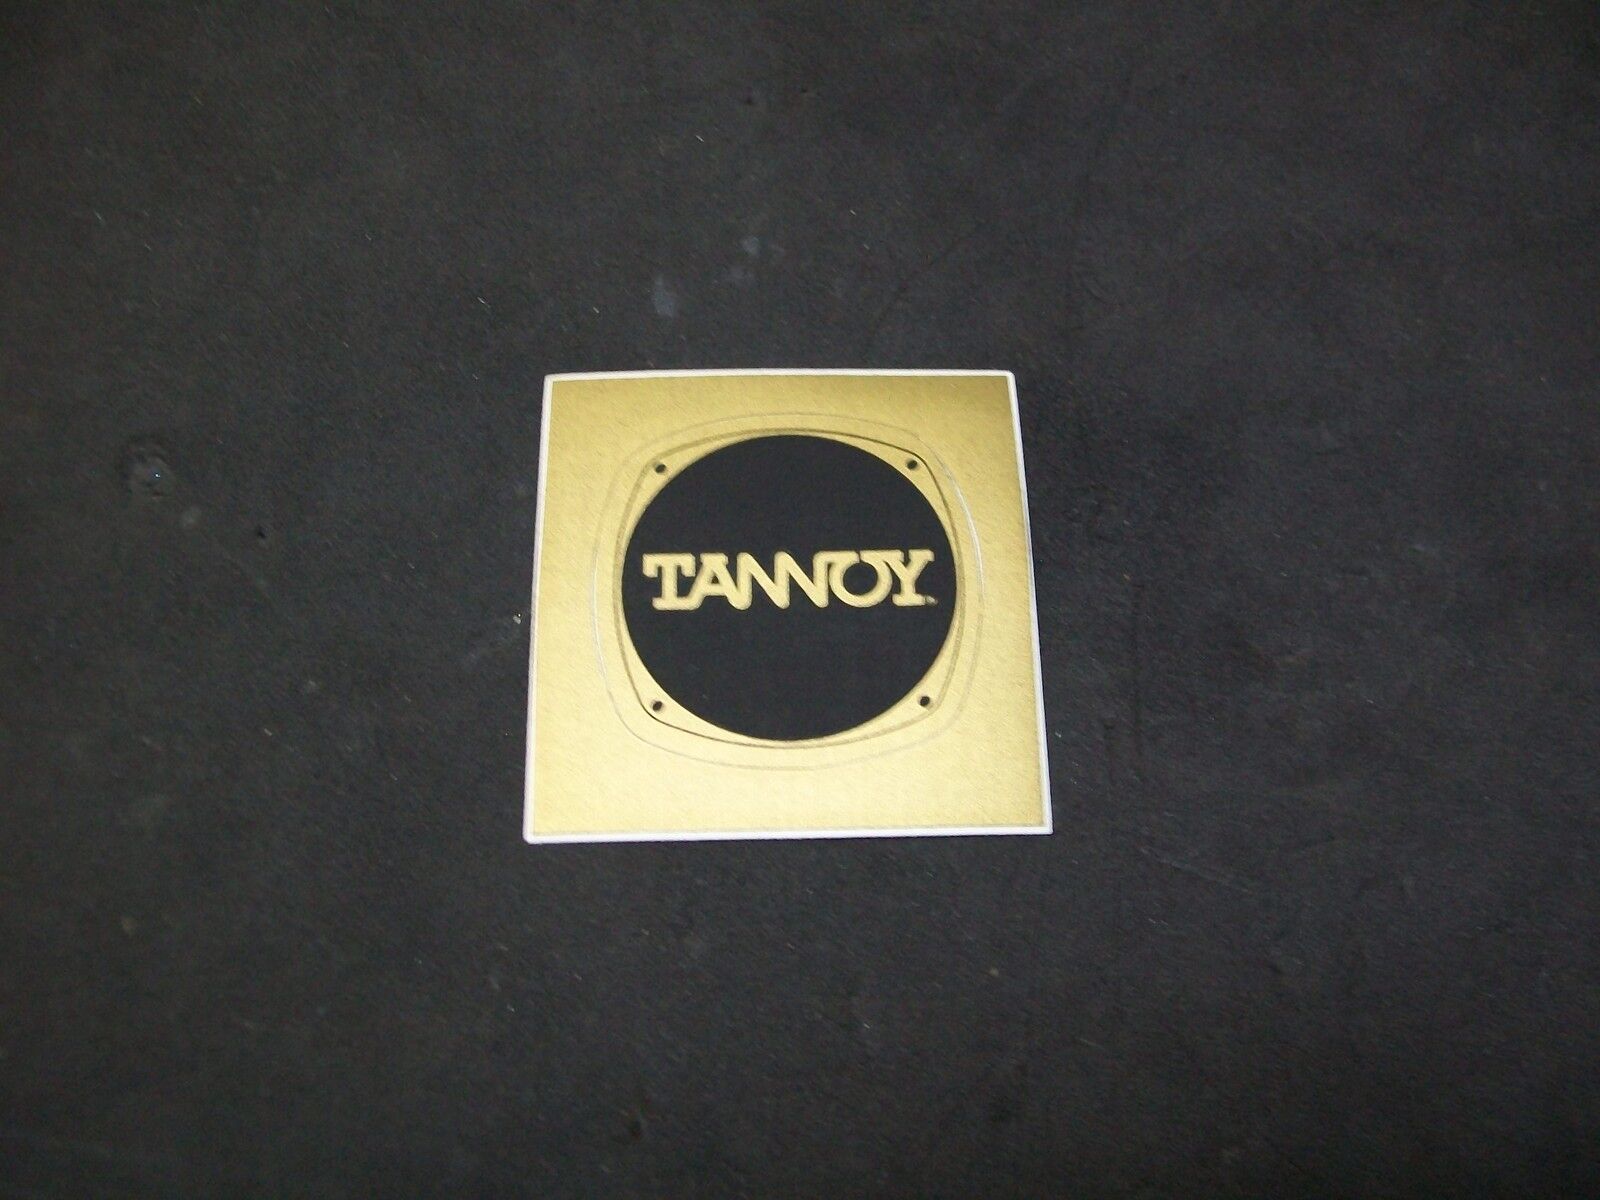  Tannoy Badge/Emblem, 1 New Old Stock, Factory Stick On. 1 1/8\